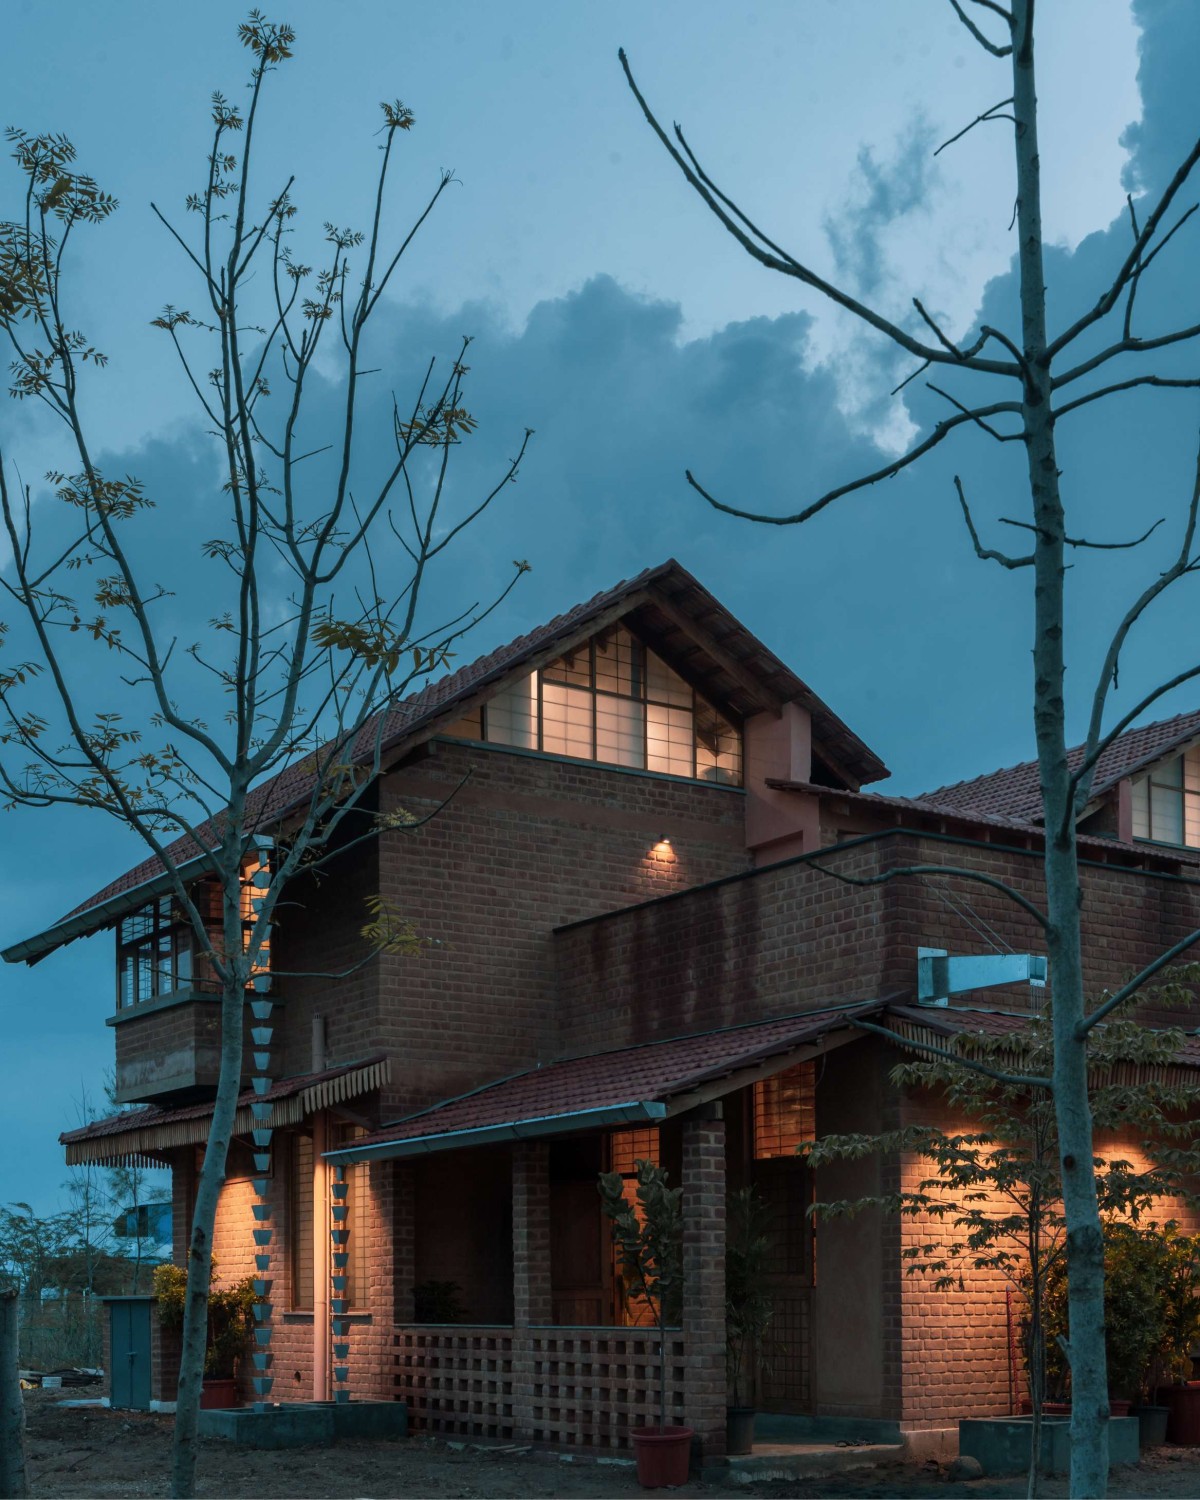 Dusk light exterior view of Brick Manor by Bhutha Earthen Architecture Studio